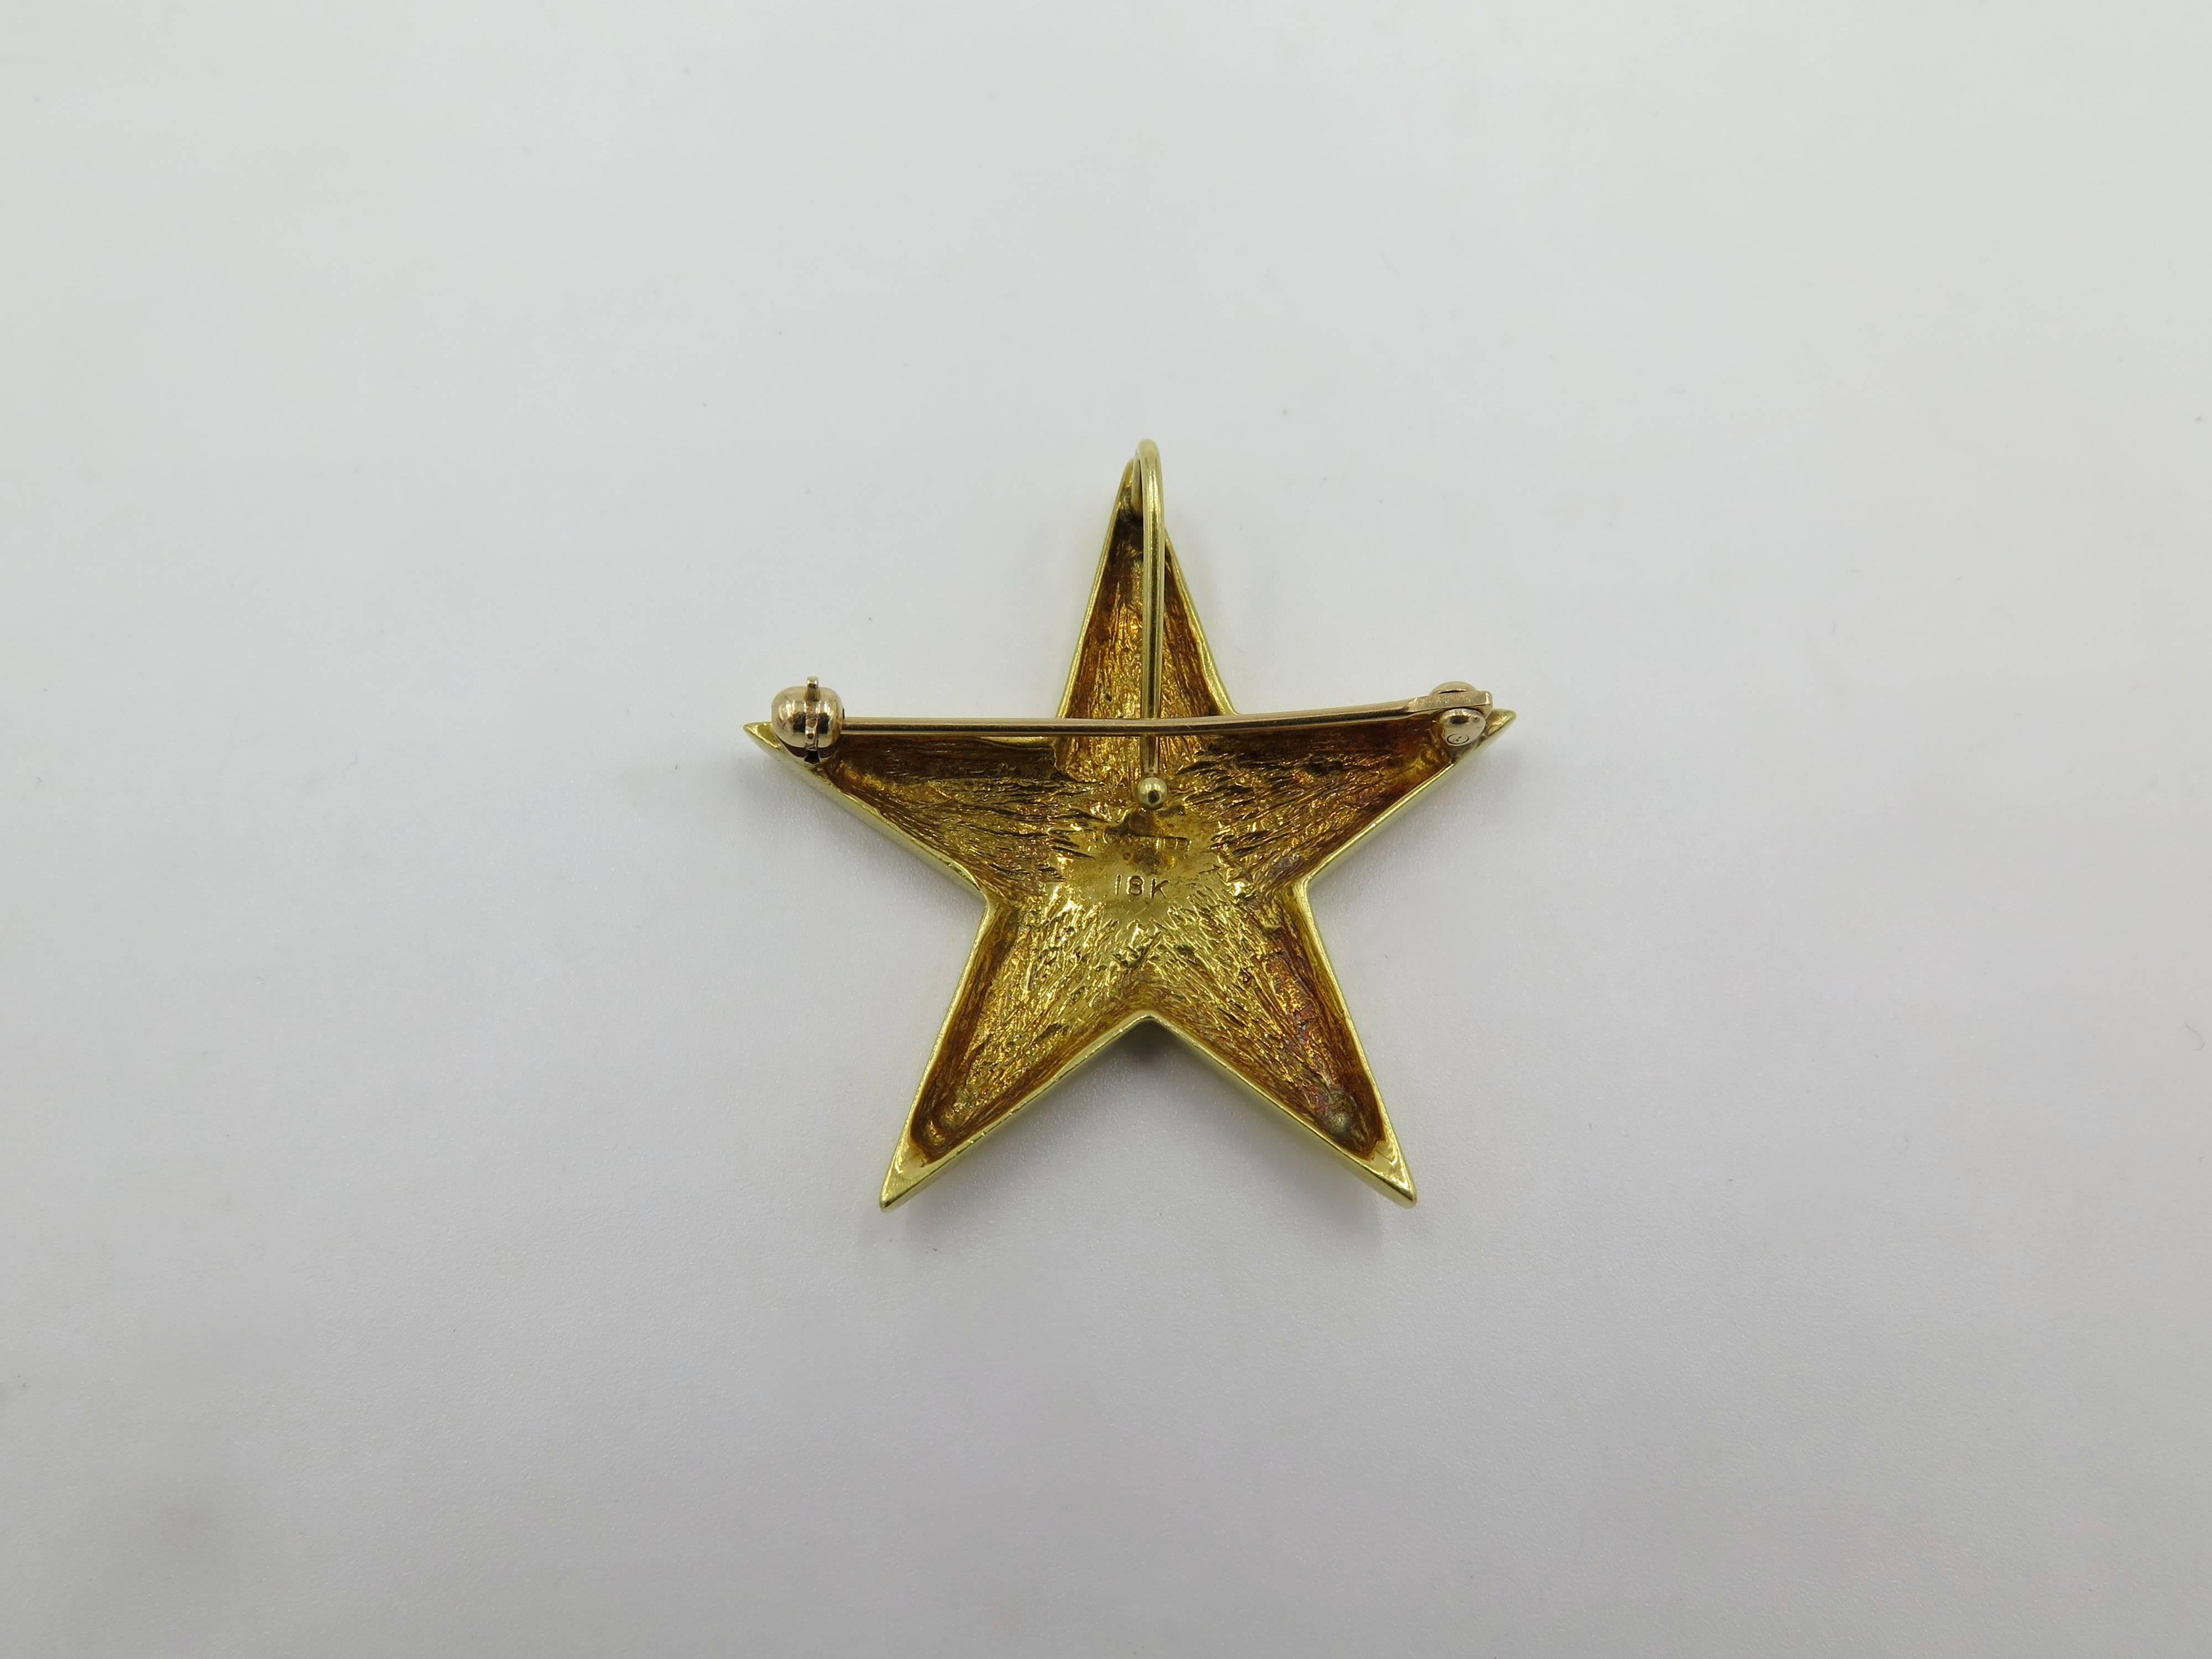 An 18 karat yellow gold star pendant brooch. Cartier. Circa 1970. Of polished gold design. Length is approximately 1 1/2 inches. Gross weight is approximately 7.8 grams. 